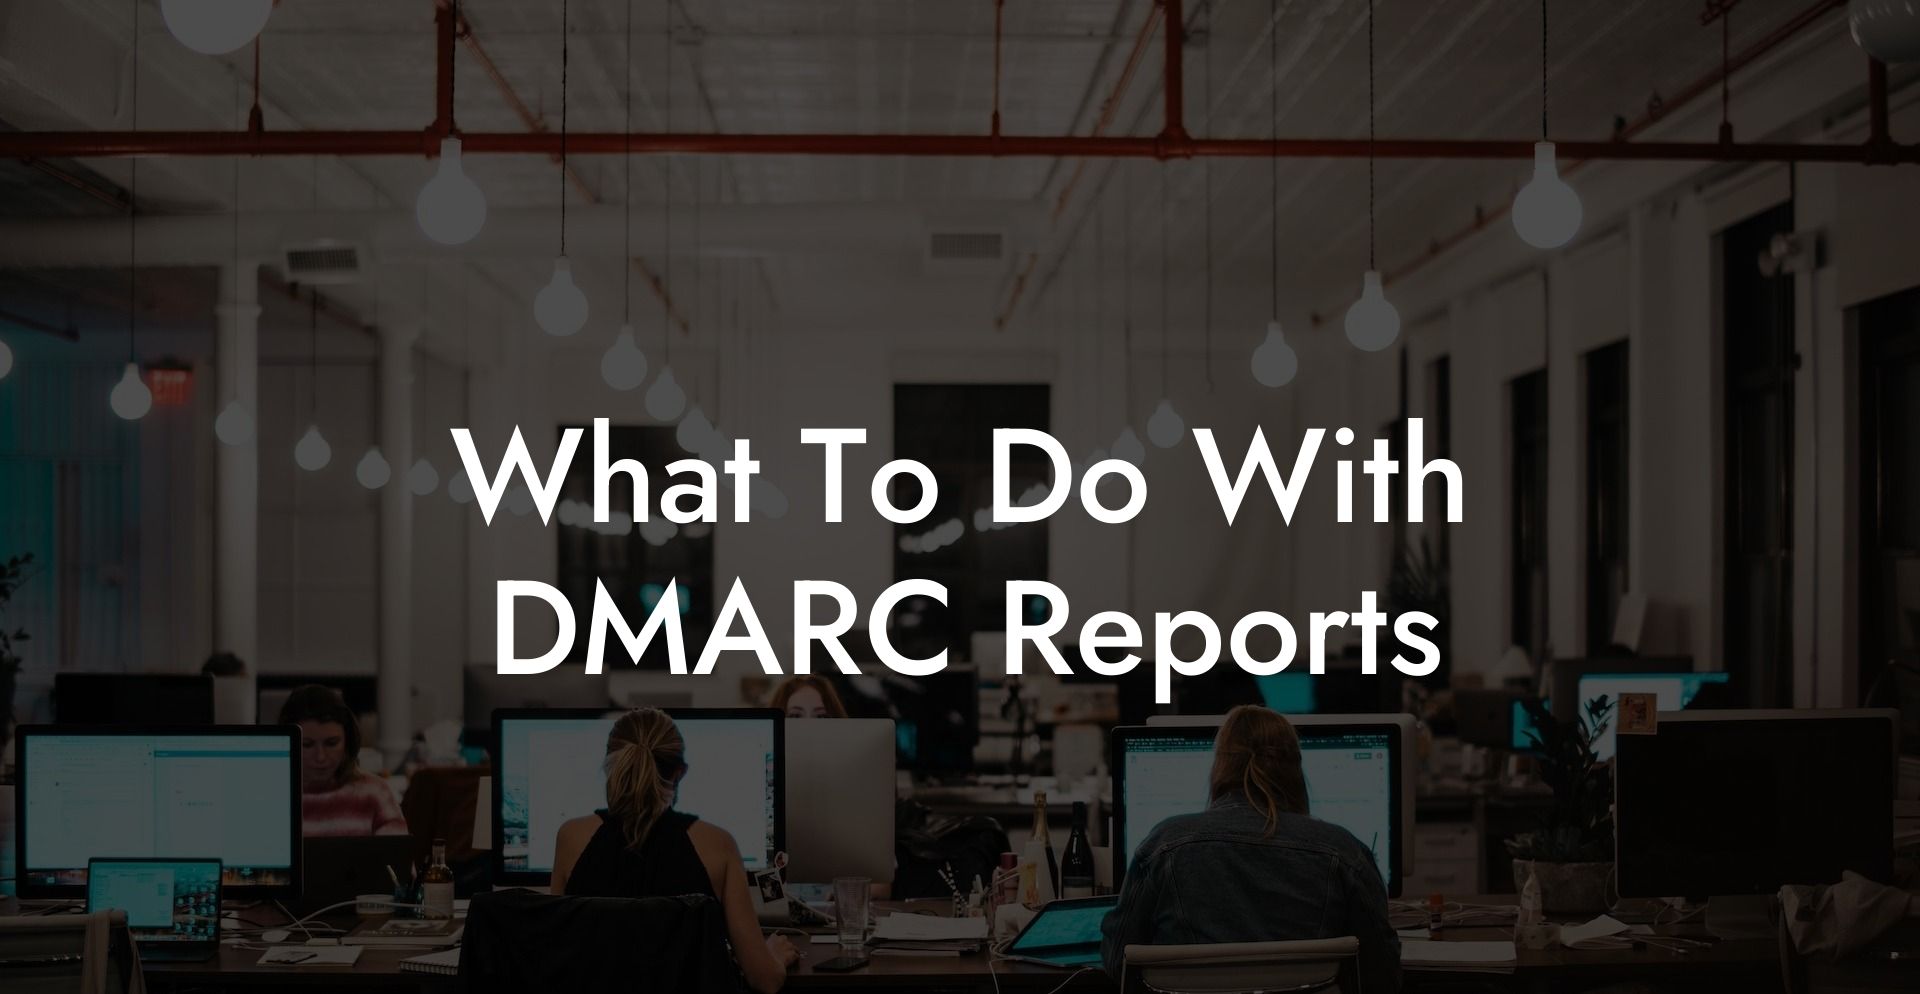 What To Do With DMARC Reports